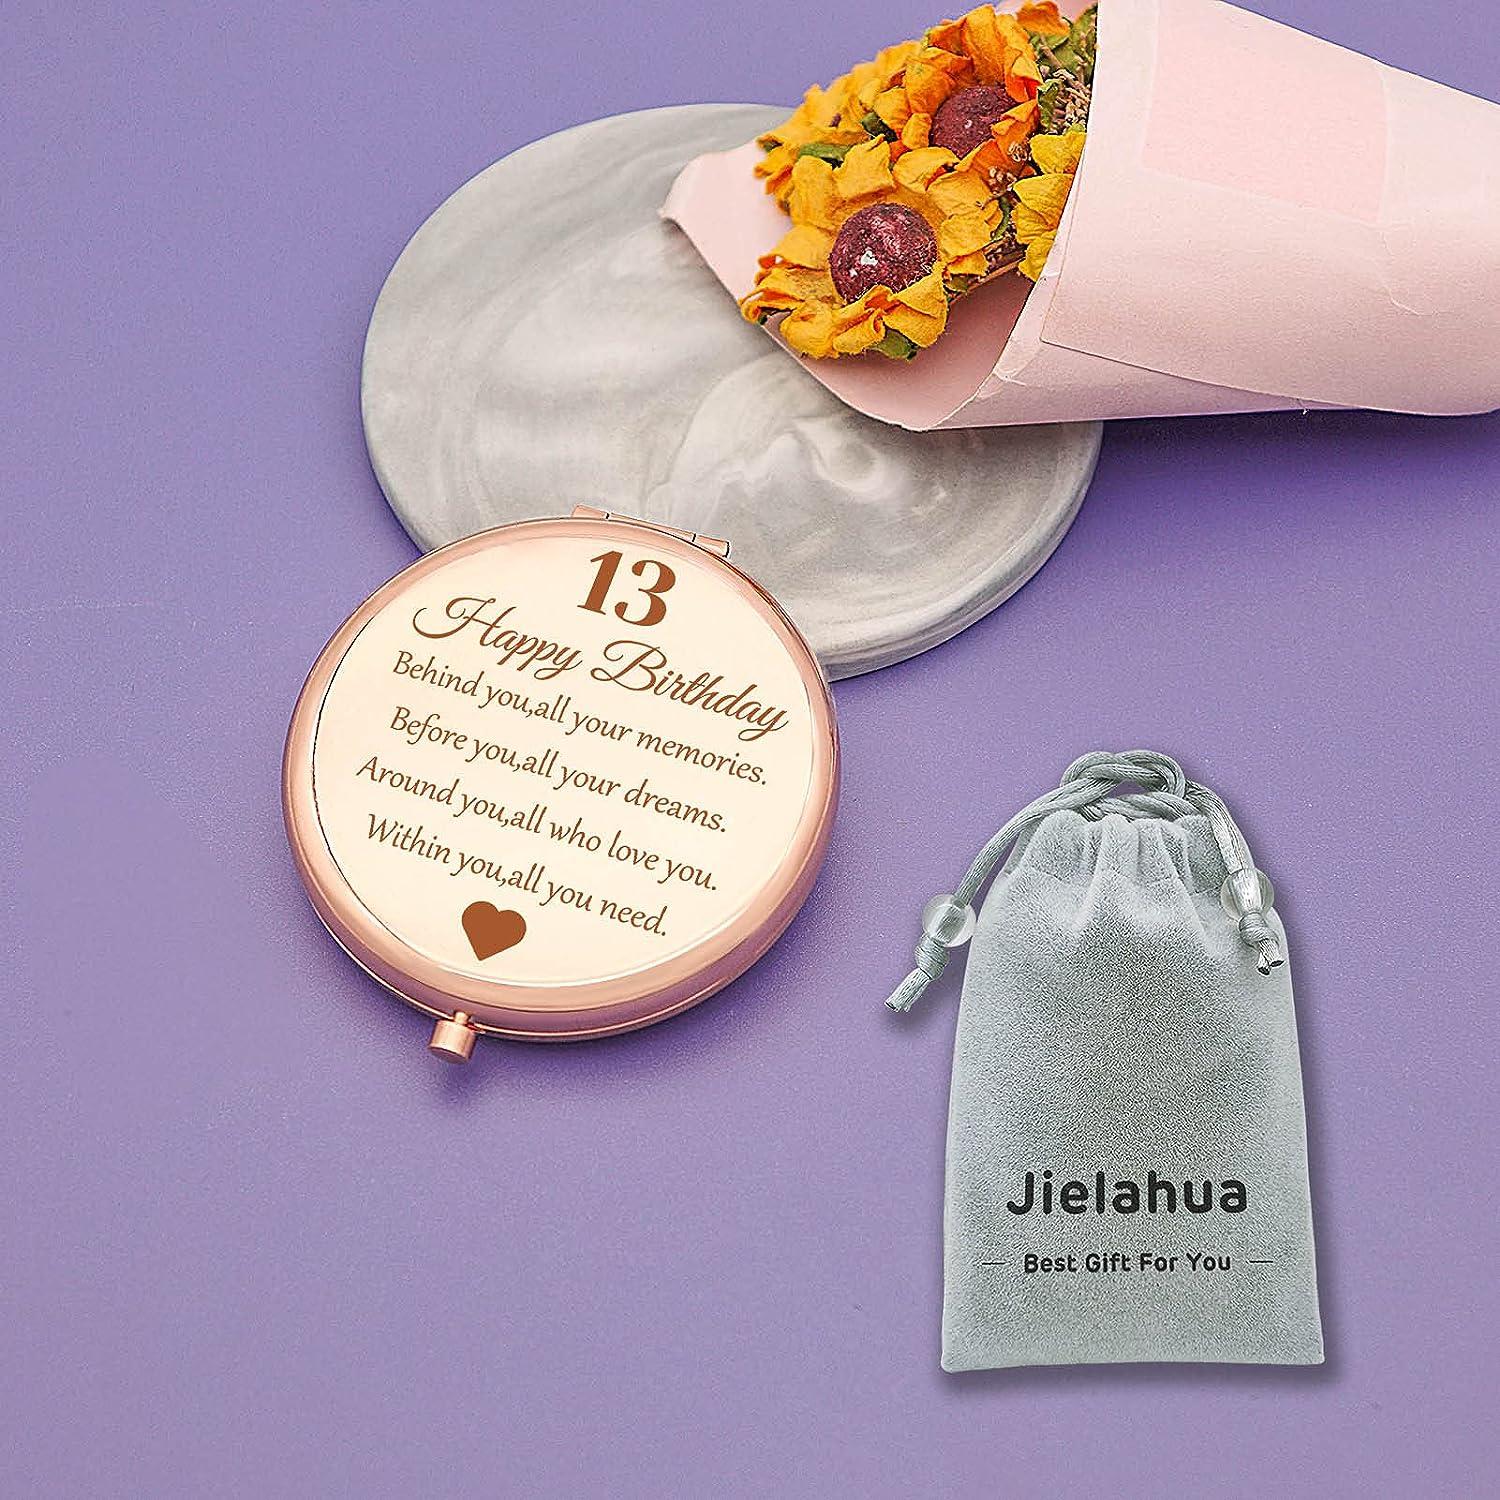 Jielahua Sweet 13th Birthday Gift for Girls Happy 13 Year Old Gifts for  Daughter Granddaughter Sister Niece Friends Rose Gold Compact Mirror for  13th Birthday Girls 13 Years Old Girl Birthday Gift